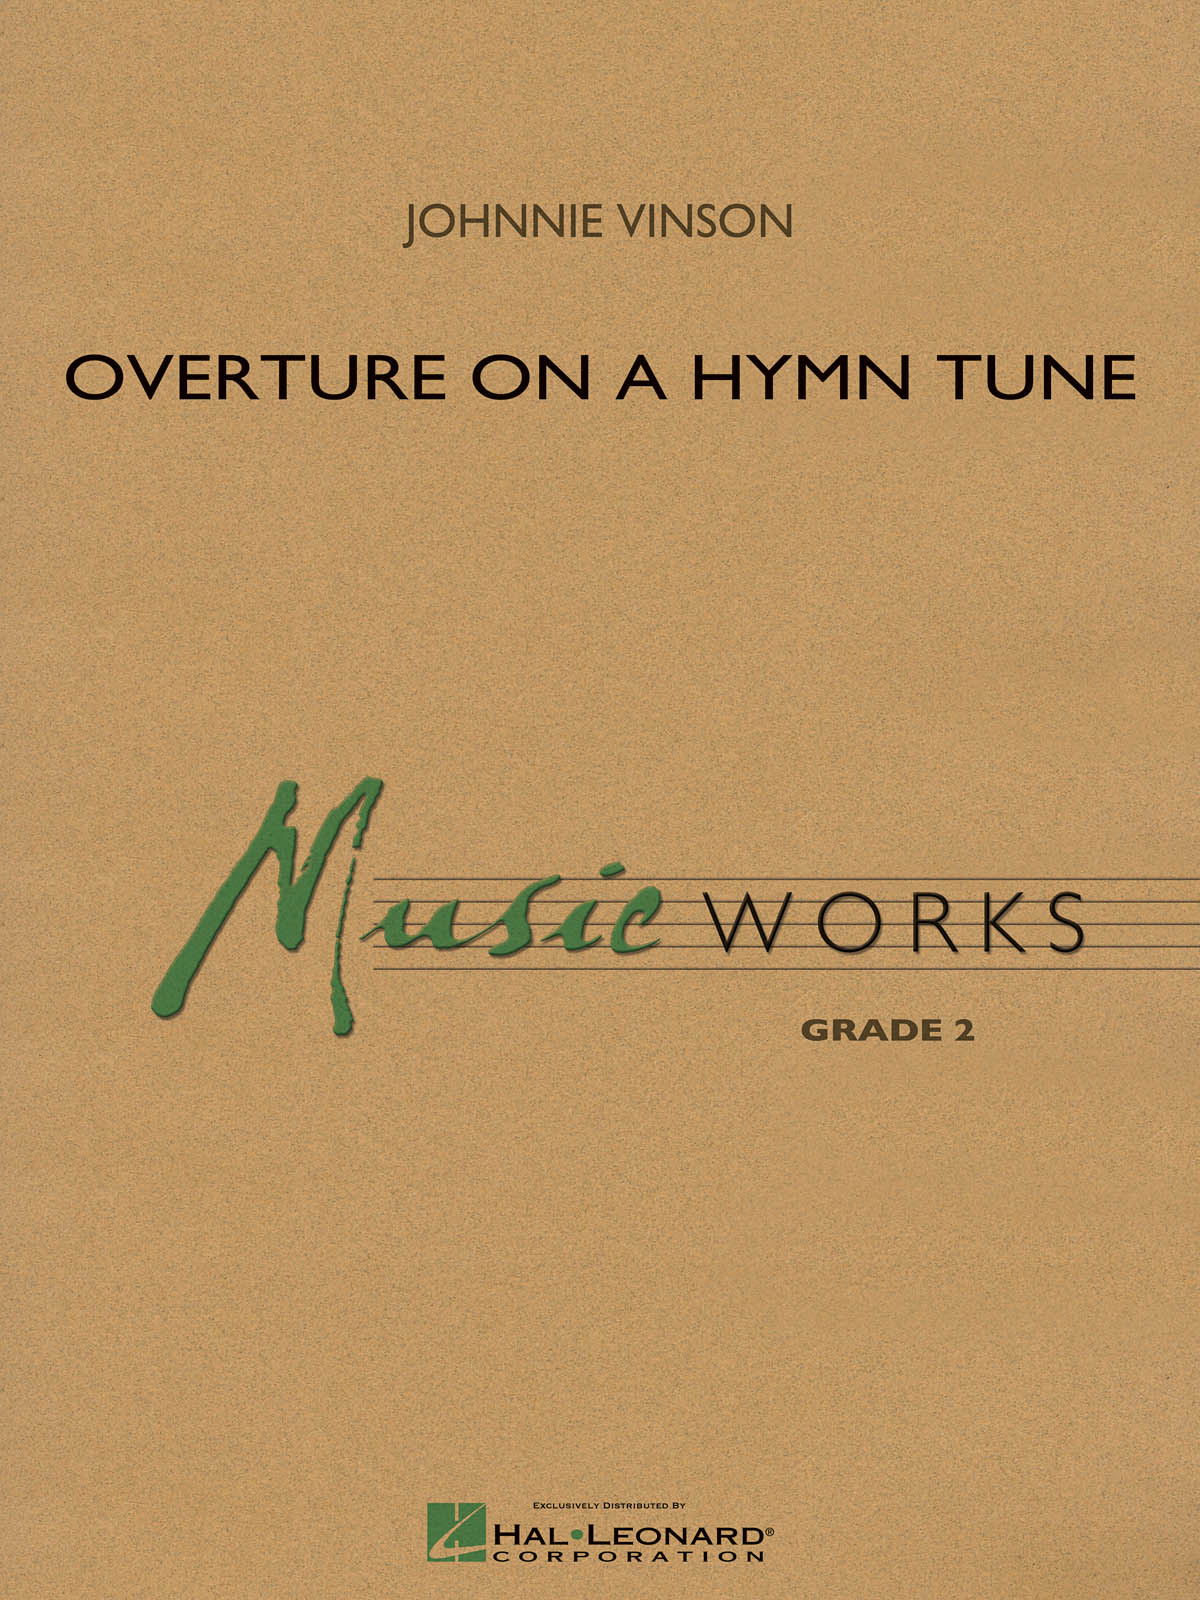 Johnnie Vinson: Overture On A Hymn Tune: Concert Band: Score